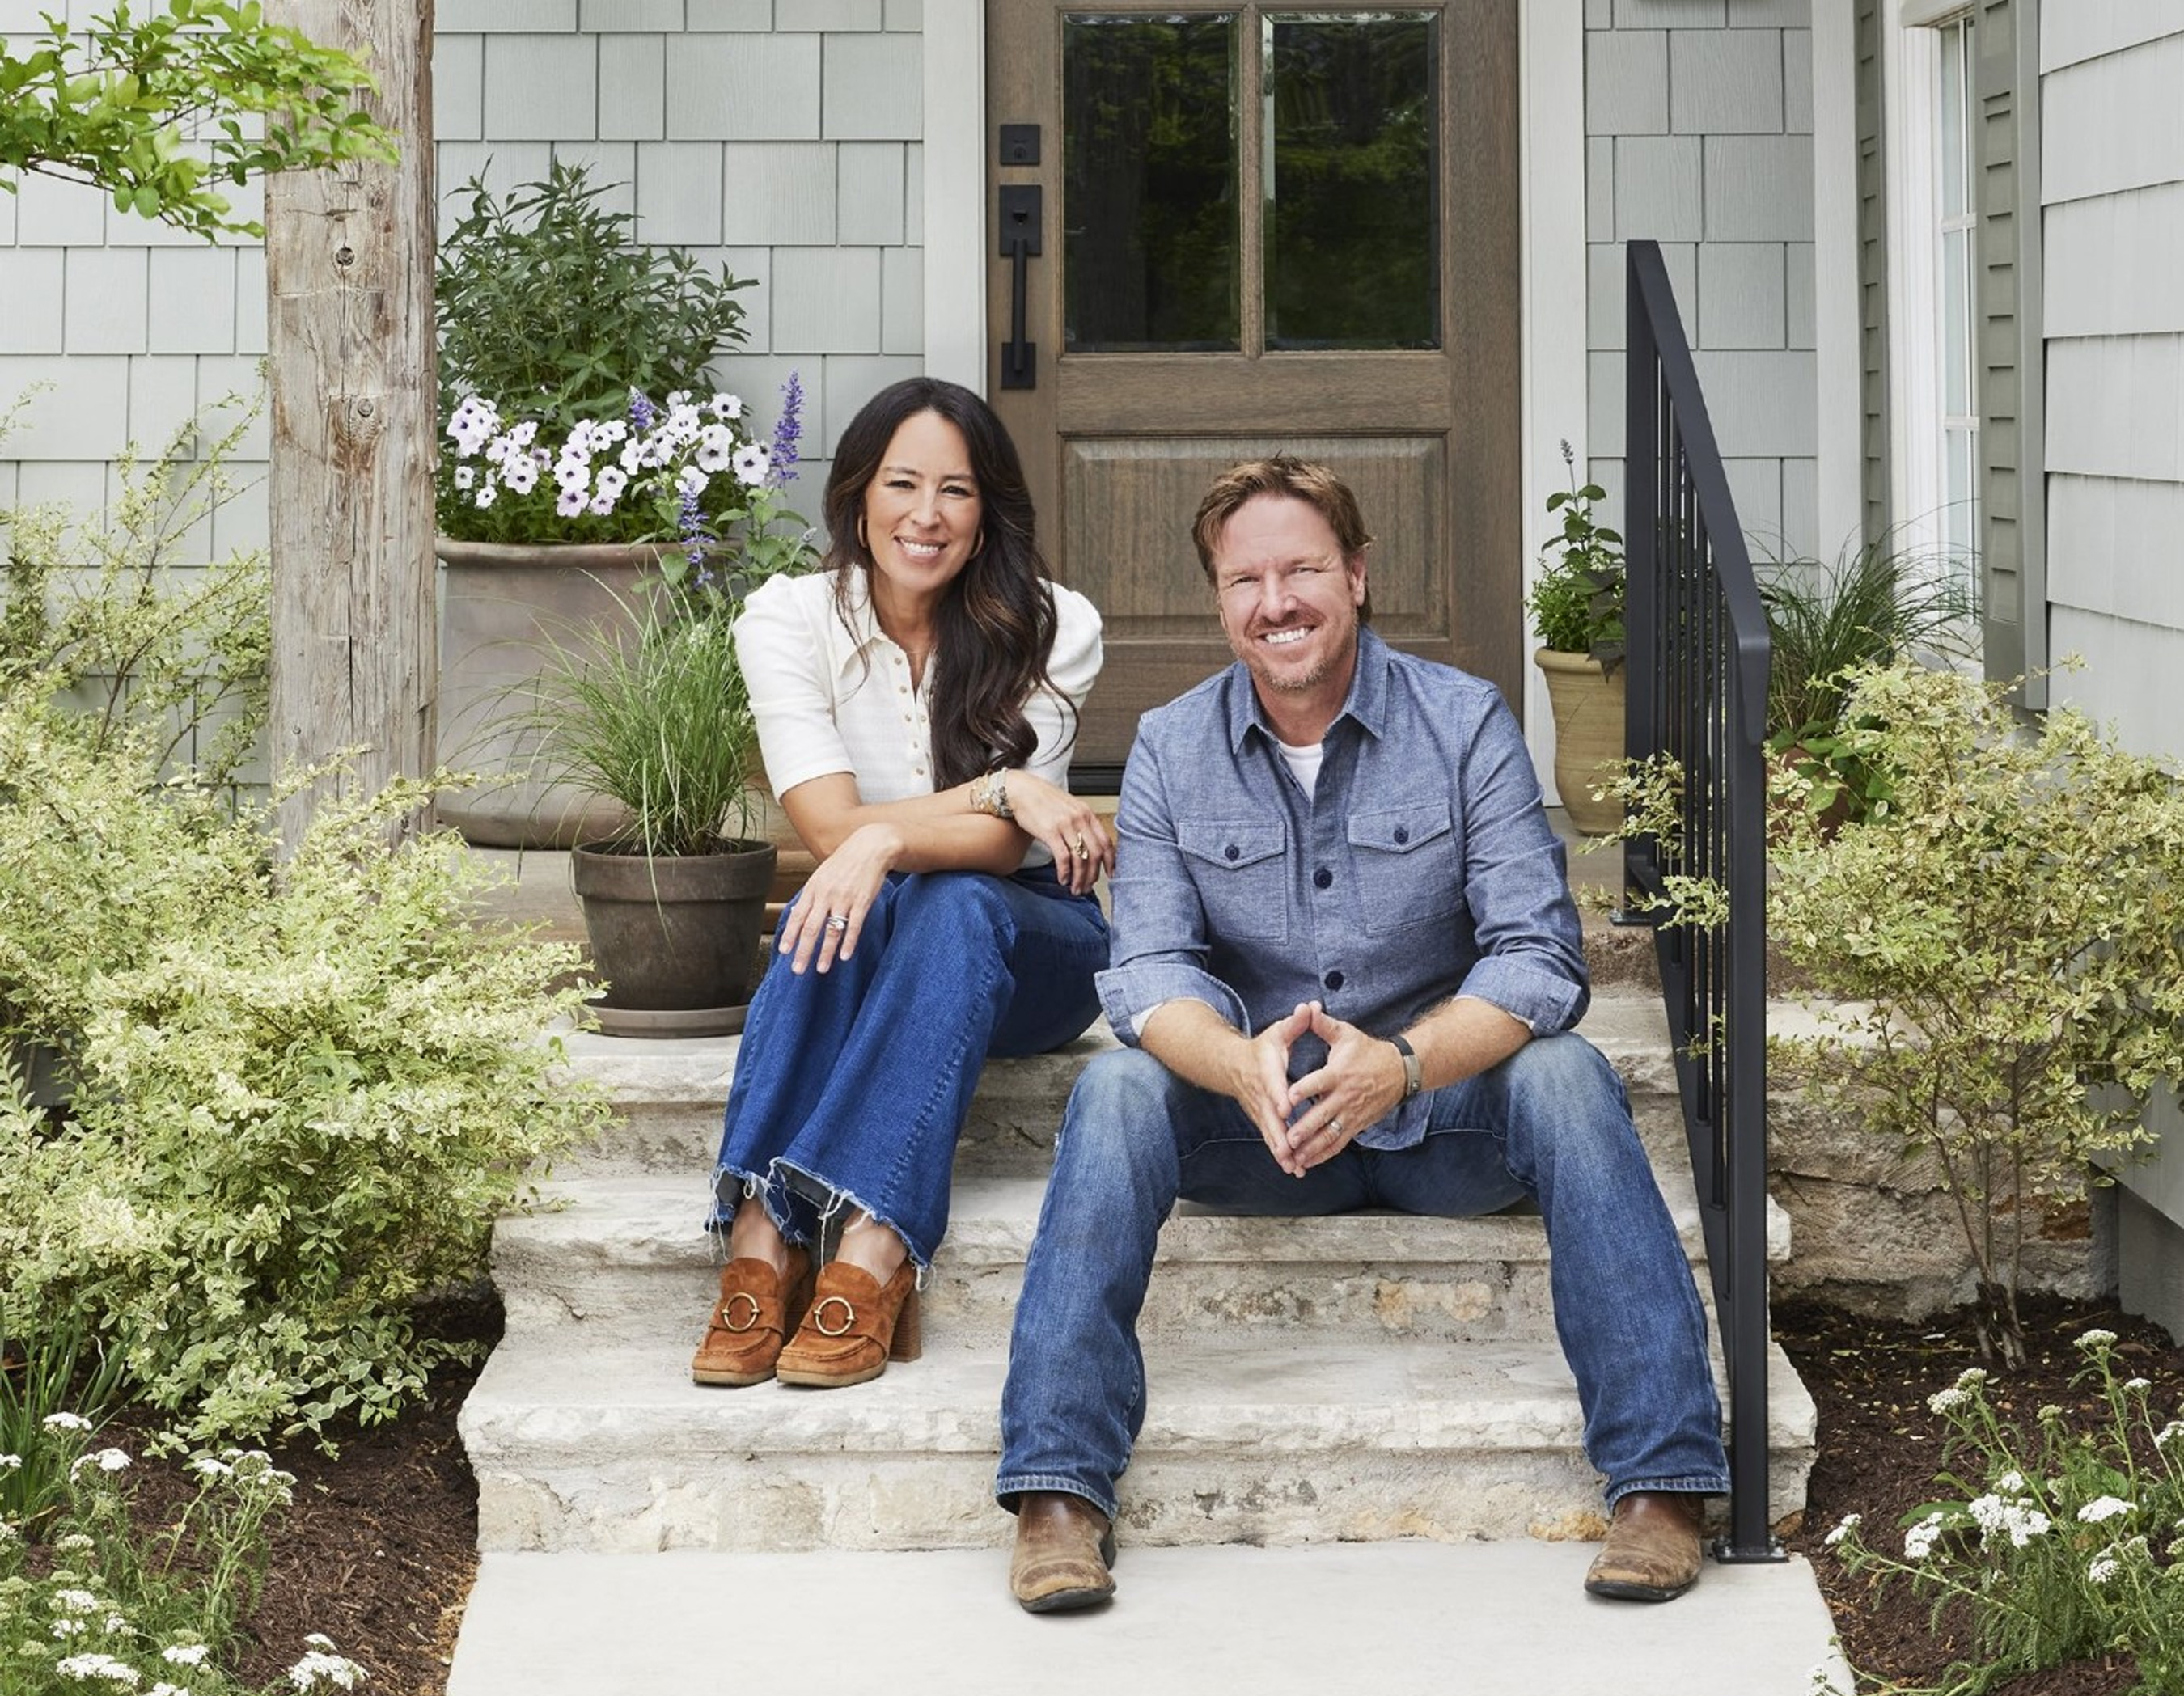 Chip and Joanna Gaines at the Minty Green home from HGTV’s Fixer Upper, featuring Hardie® Shingle from the Magnolia Home | James Hardie Collection.